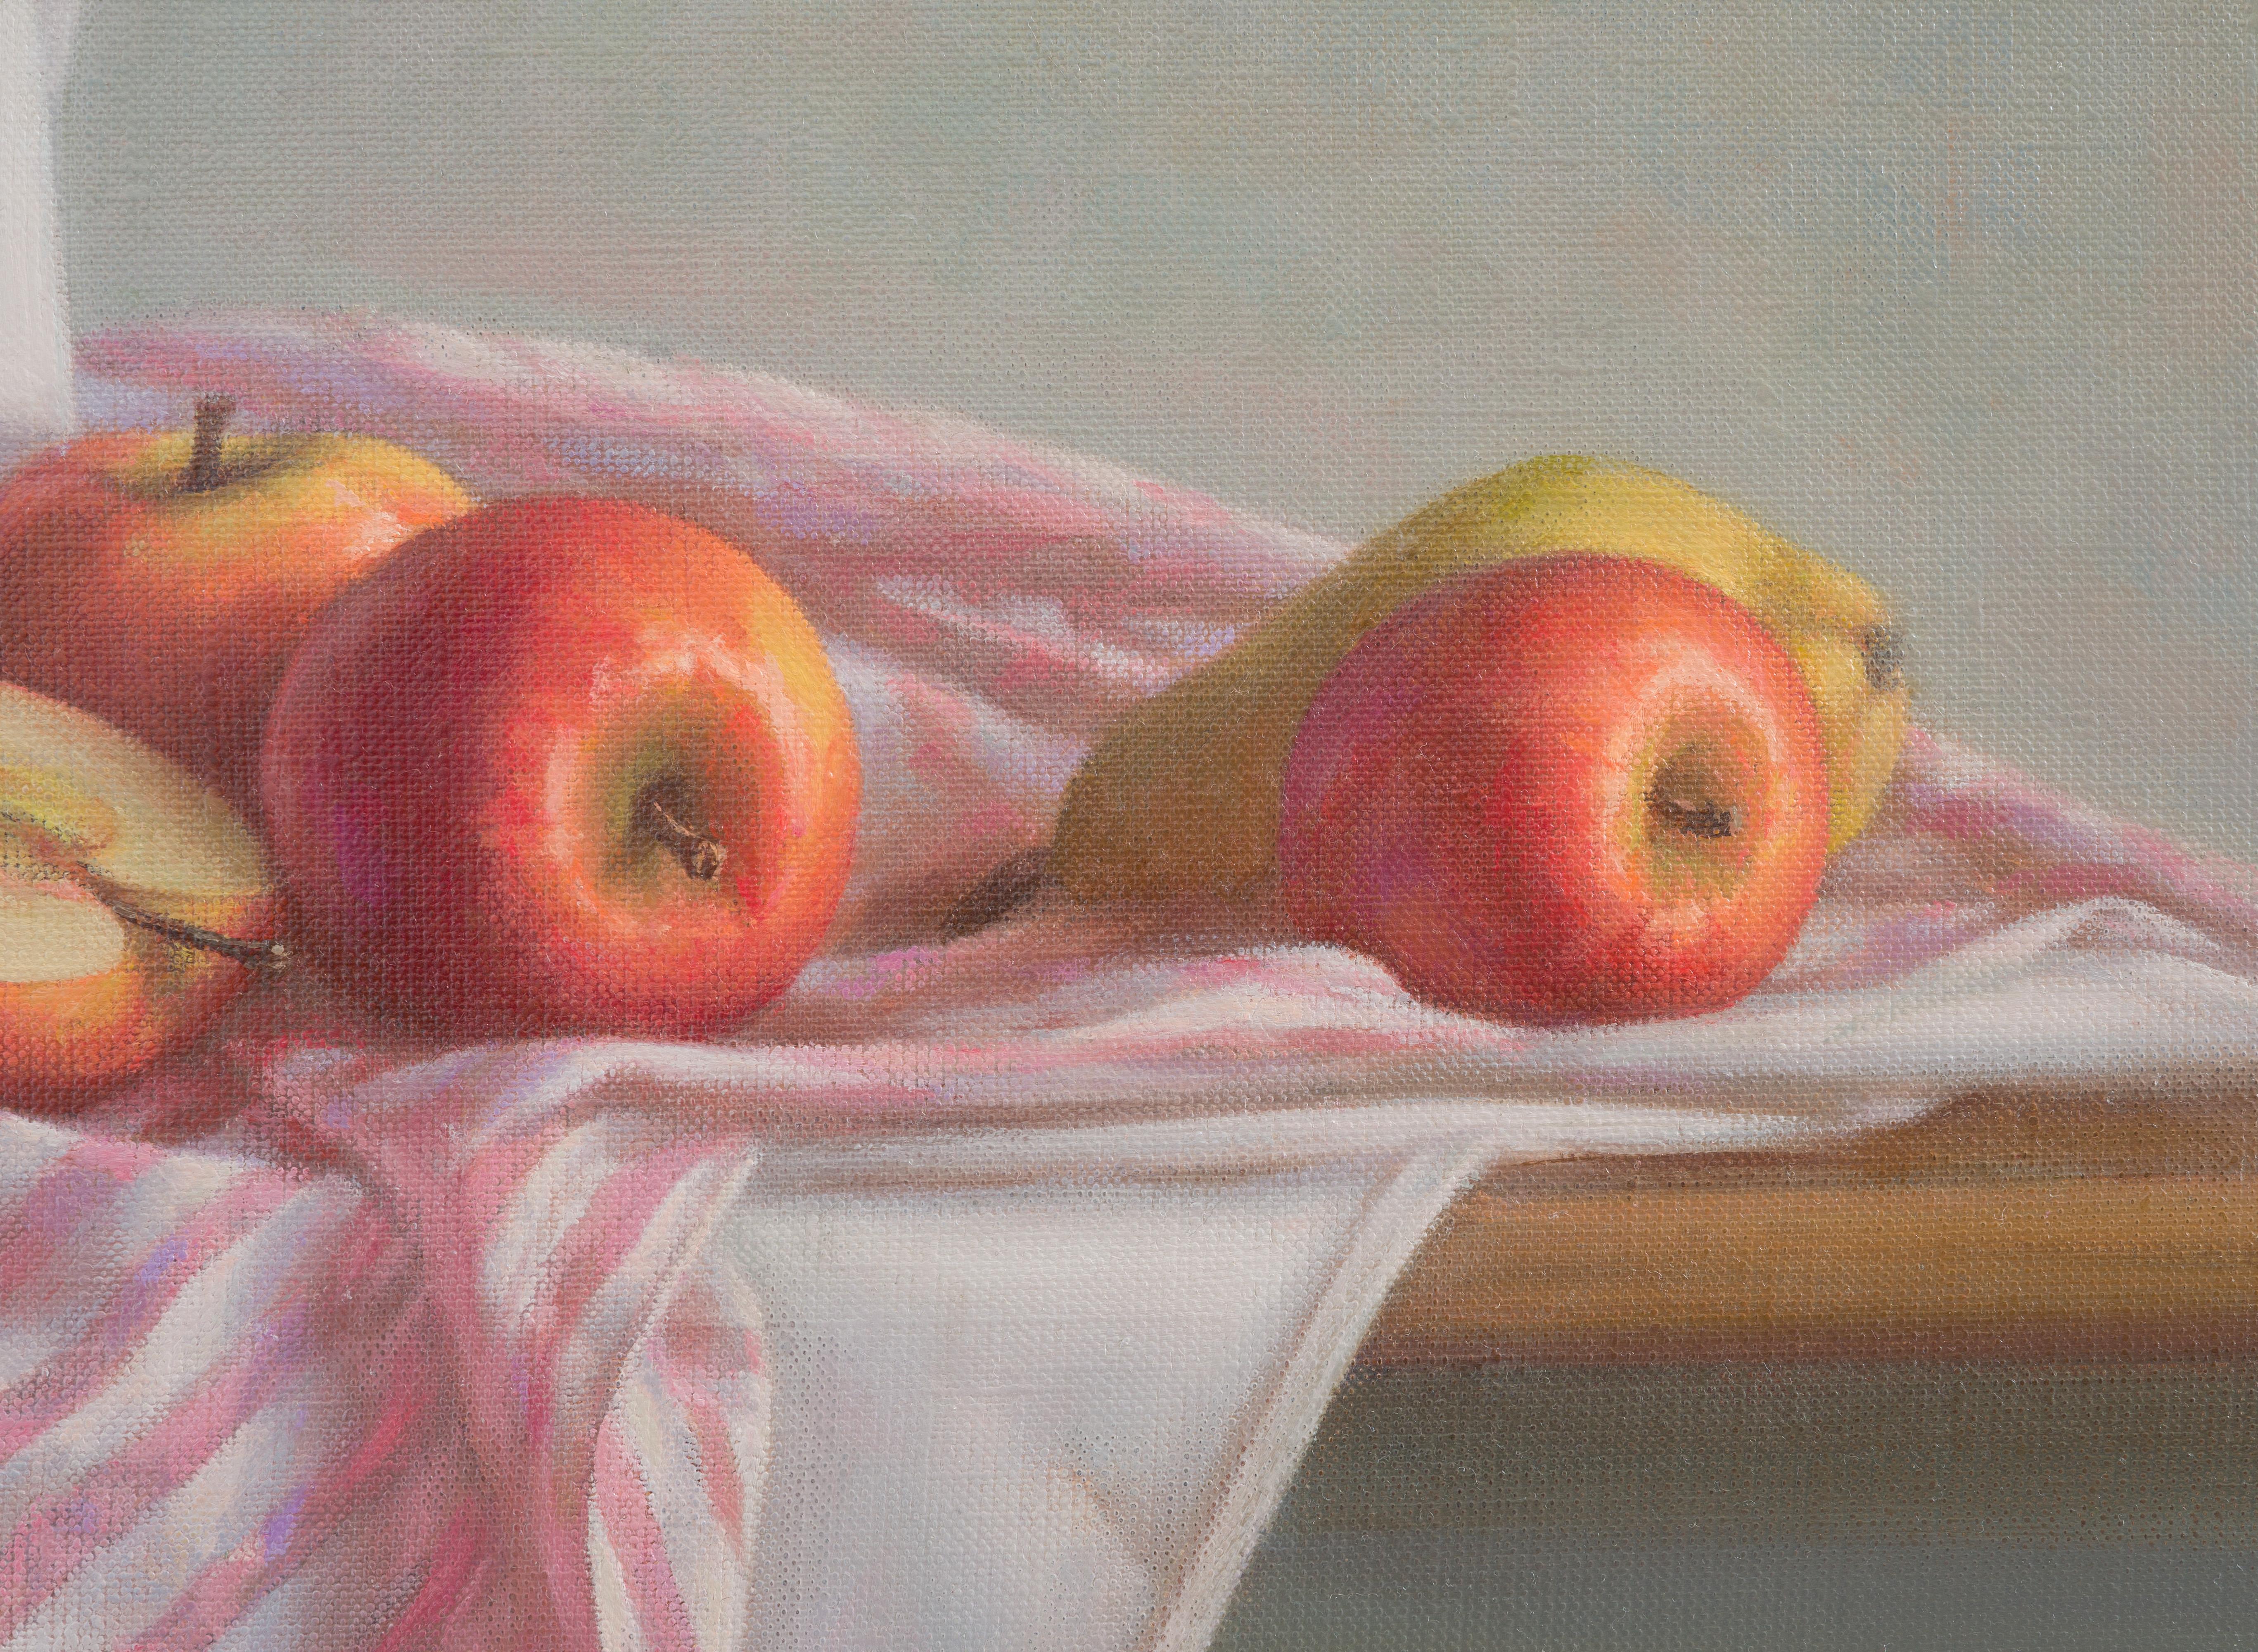 “Still life with pink drapery” is a celebration of the beauty that can be found in the simplest of things. The medium used is oil on canvas, which allows to capture the vibrant color, delicate texture, and the play of light on the subject matter.